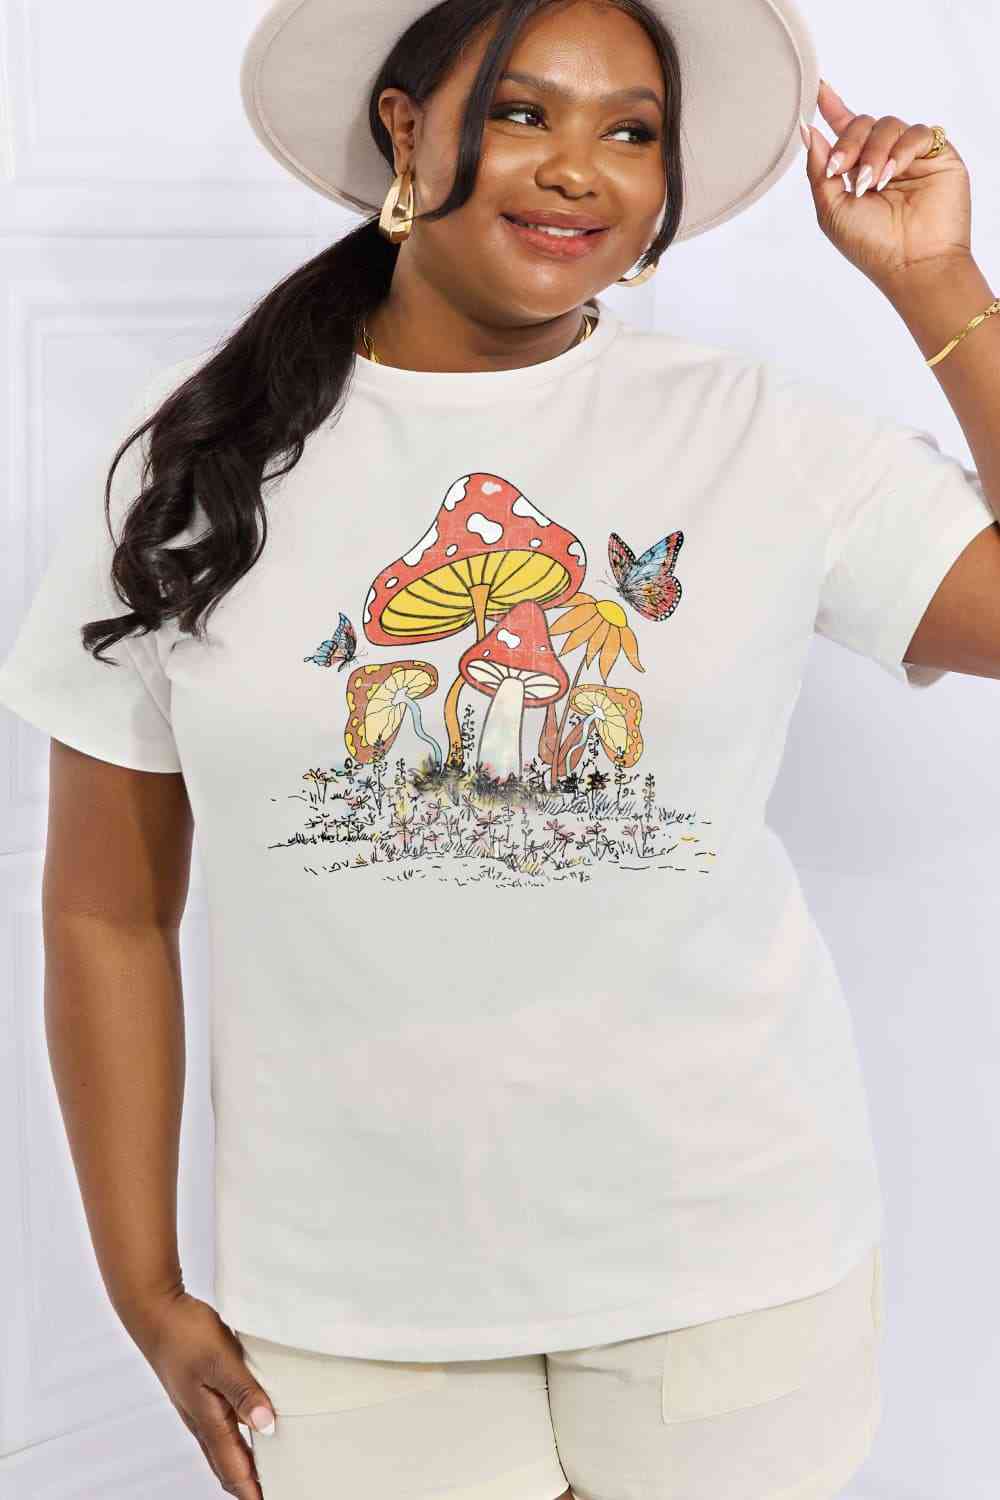 Simply Love Full Size Mushroom & Butterfly Graphic Cotton T-Shirt